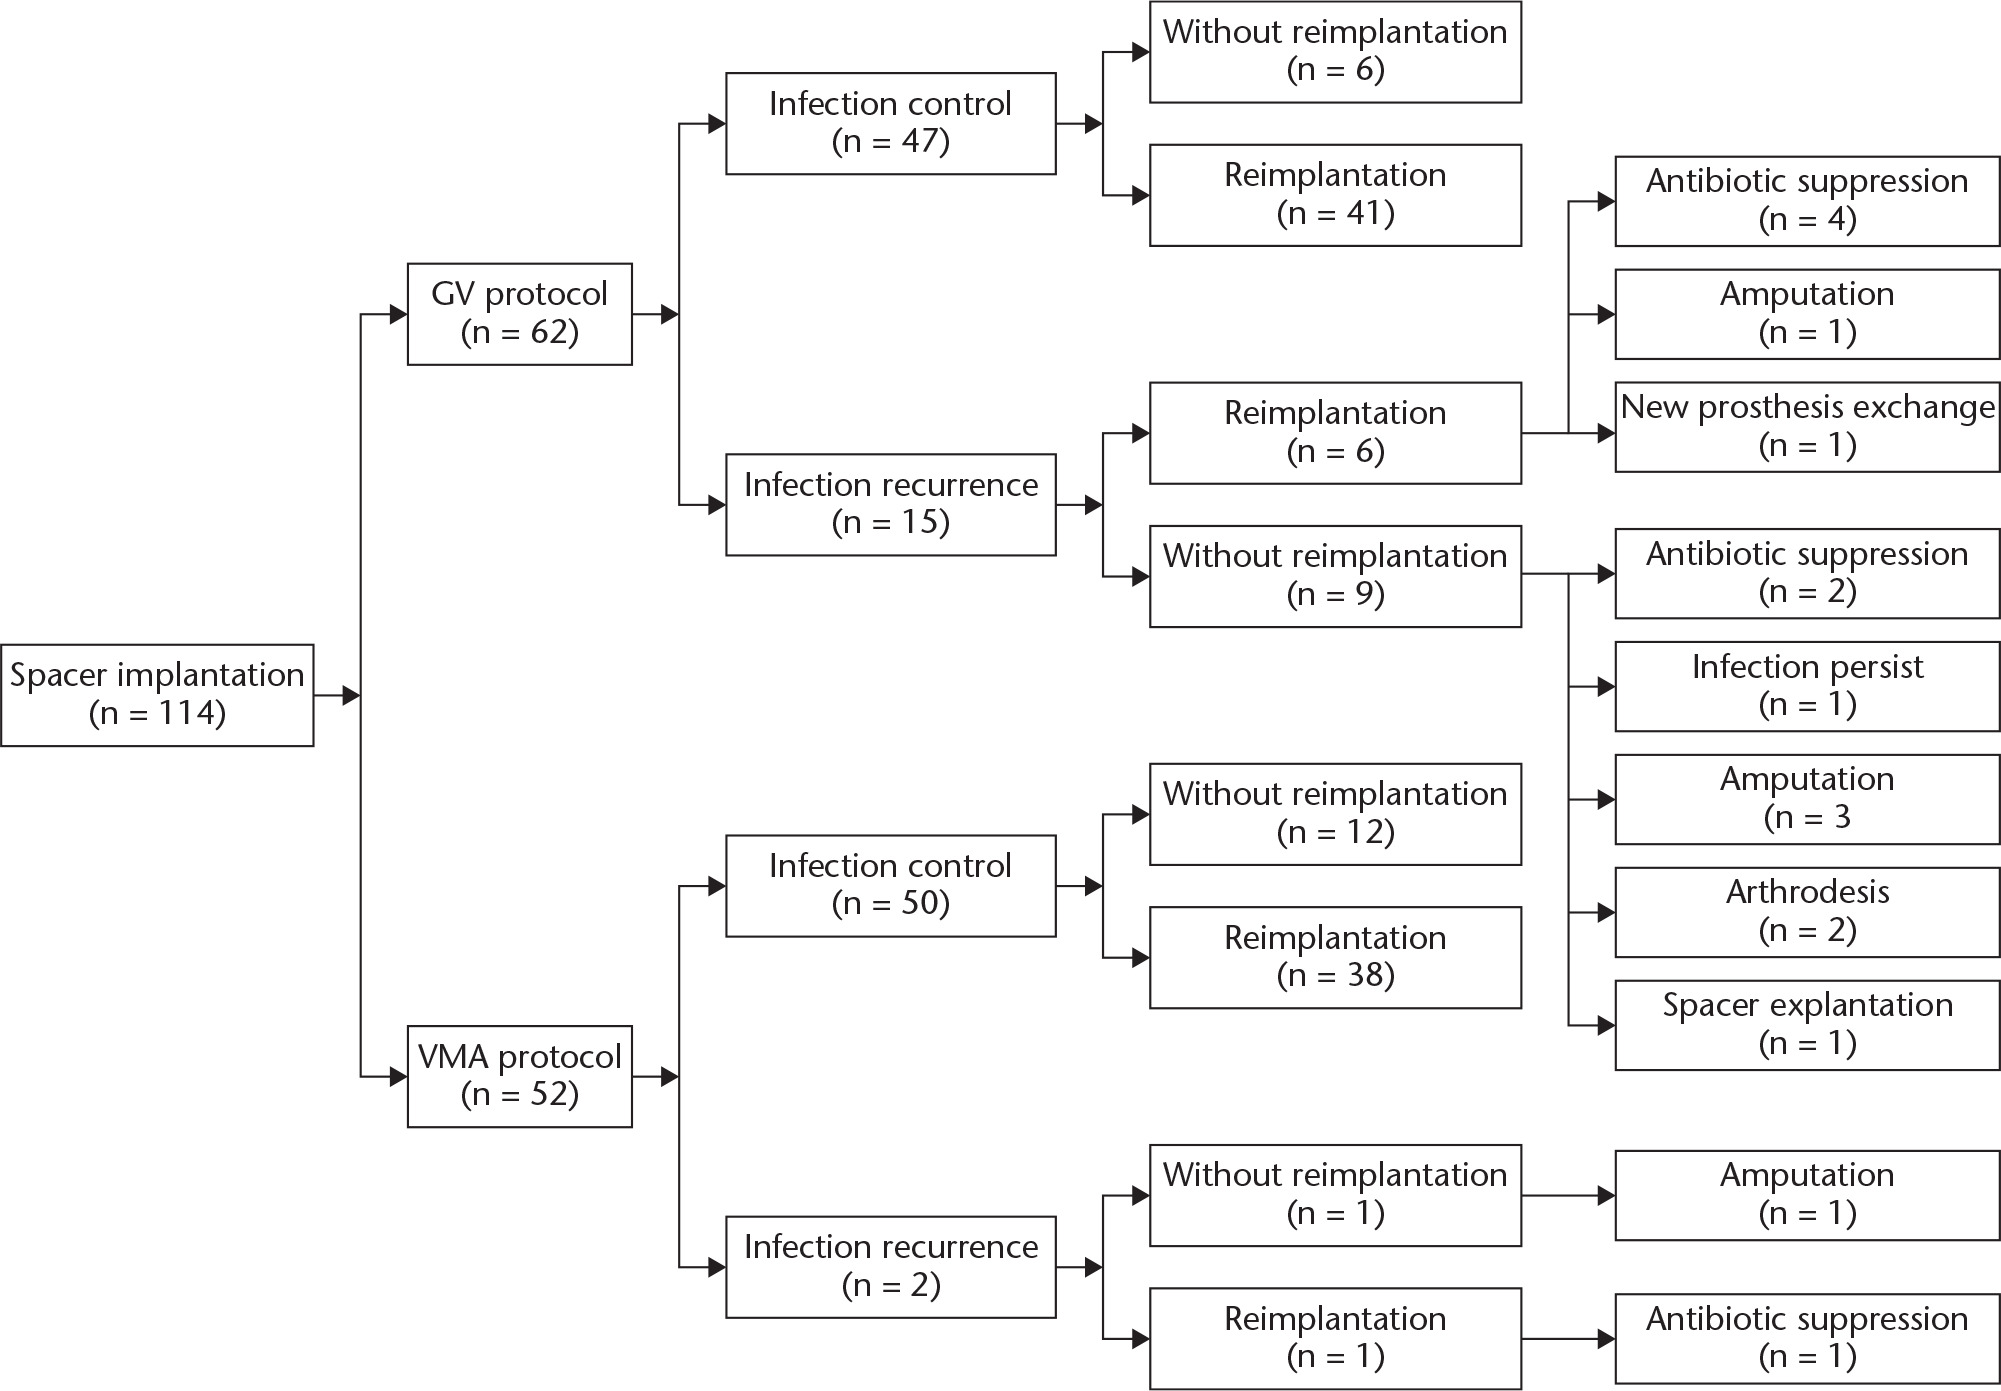 Fig. 1 
            The outcome flowchart of 114 prosthetic joint infection (PJI) cases treated with different antibiotic-loading protocols. The results shown in this flowchart were obtained at the last follow-up. GV, gentamicin and vancomycin; VMA, vancomycin, meropenem, and amphotericin.
          